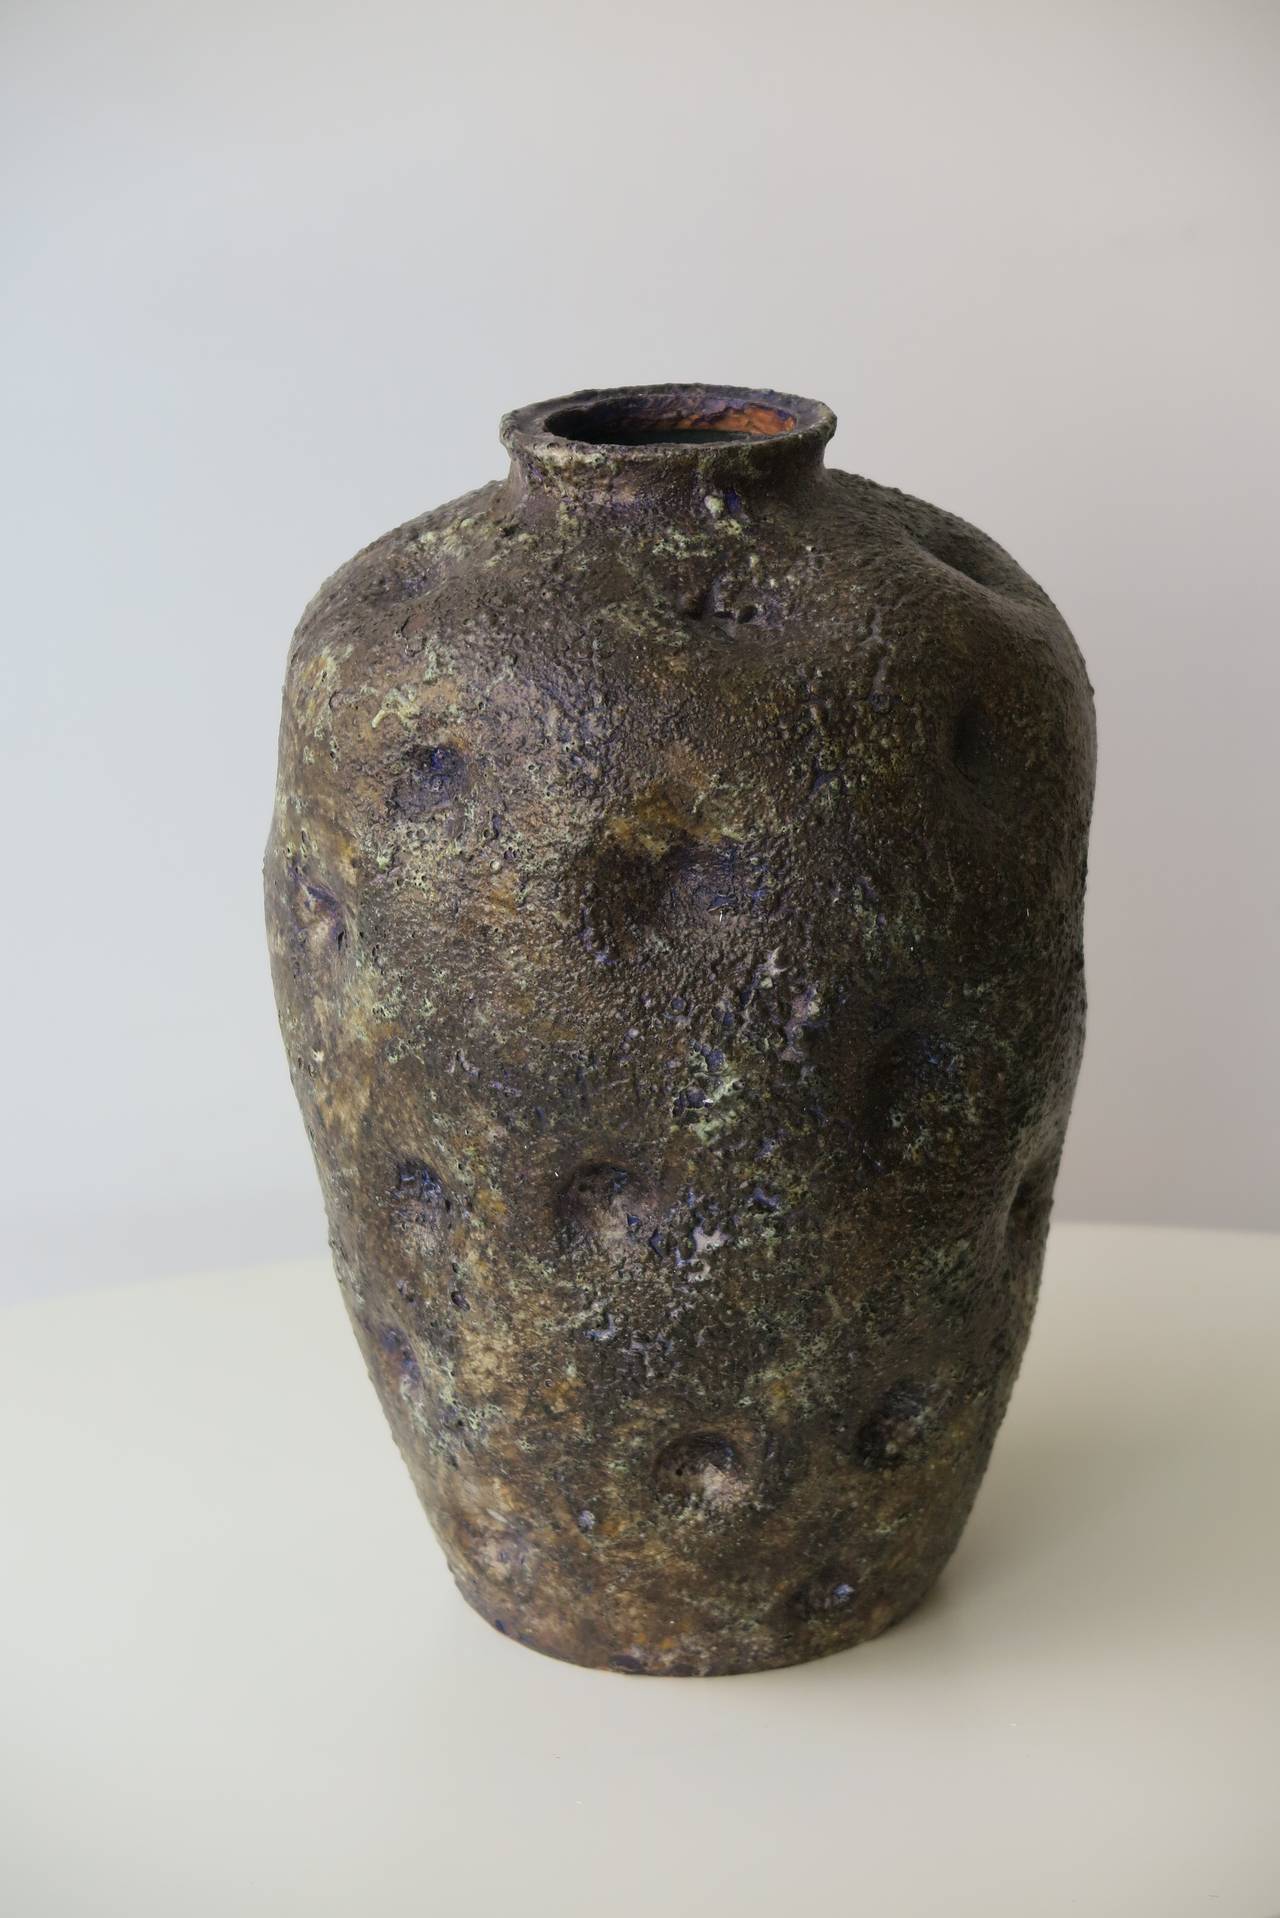 An important unique studio vase in dark brown with violet shades and gold glimmer in ceramic, painted by hand by Marcello Fantoni, Florence, Italy, (1915-2011). Could also be made as a table lamp.
Provenance: Collection from an Italian Fantoni